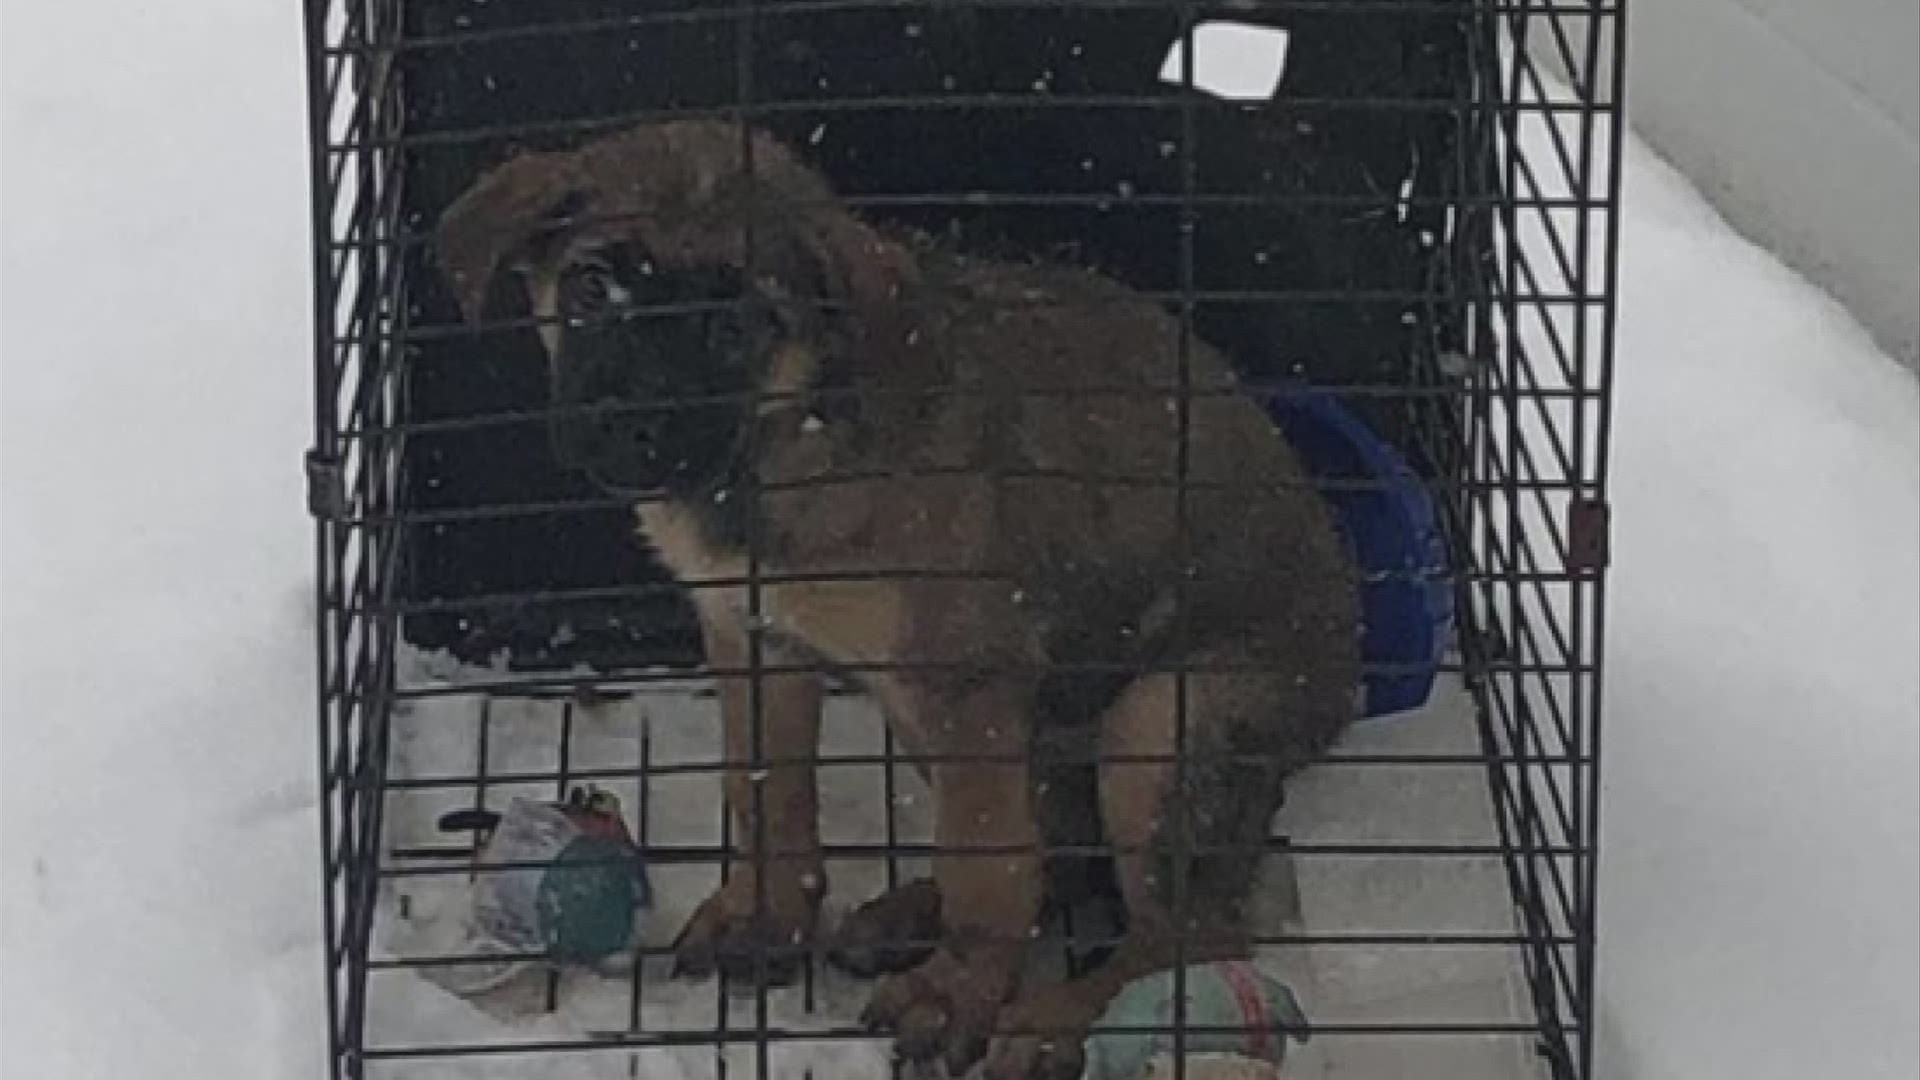 The Franklin County Dog Shelter posted on Thursday that a dog was left in their snowy parking lot in a cage with some toys.